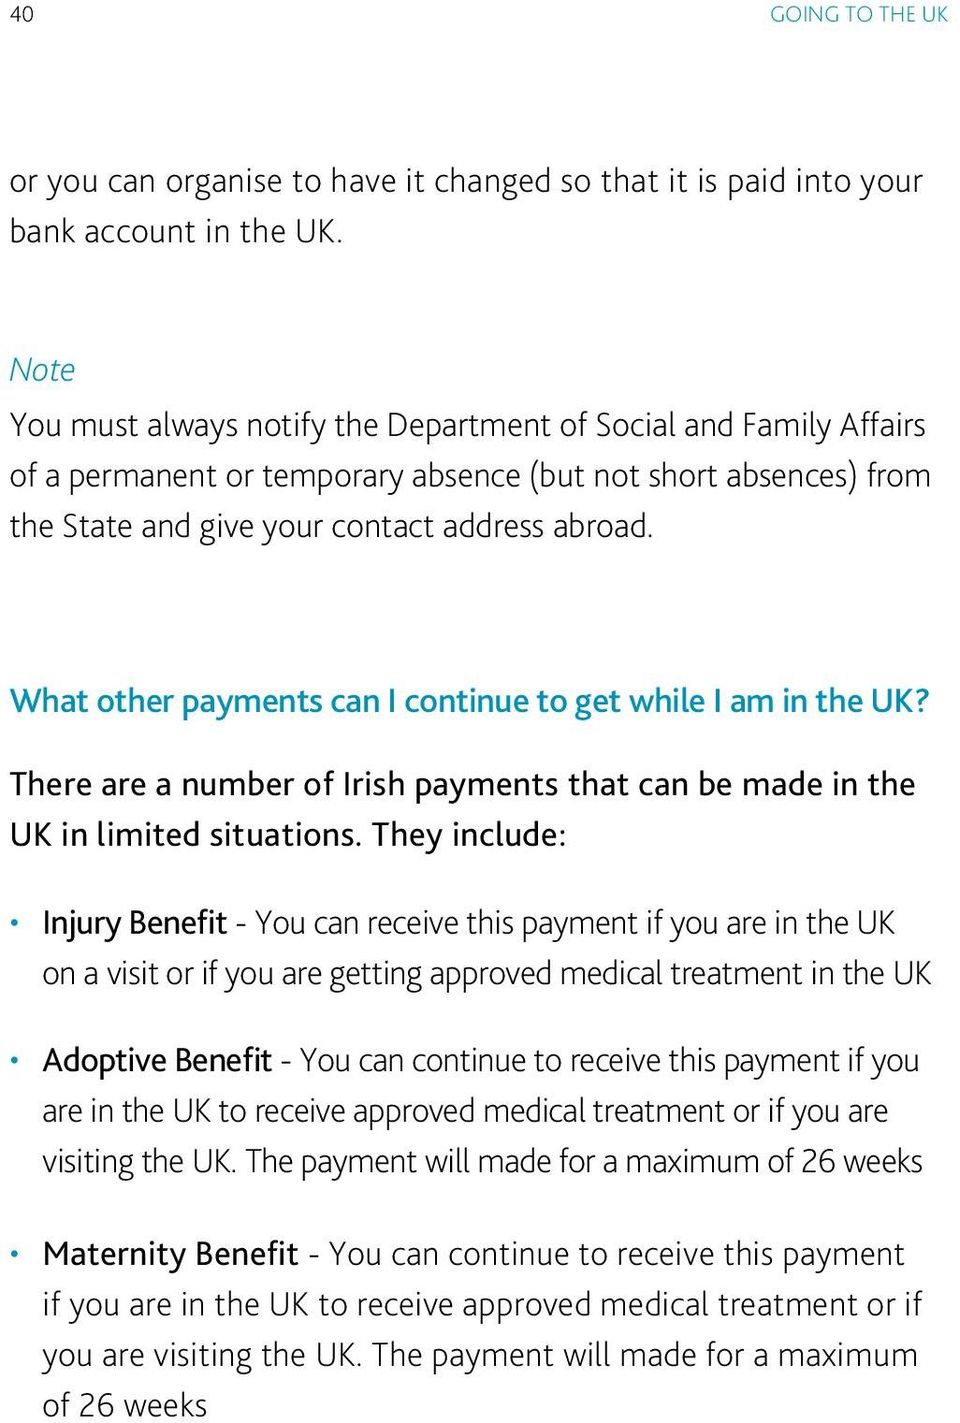 What other payments can I continue to get while I am in the UK? There are a number of Irish payments that can be made in the UK in limited situations.